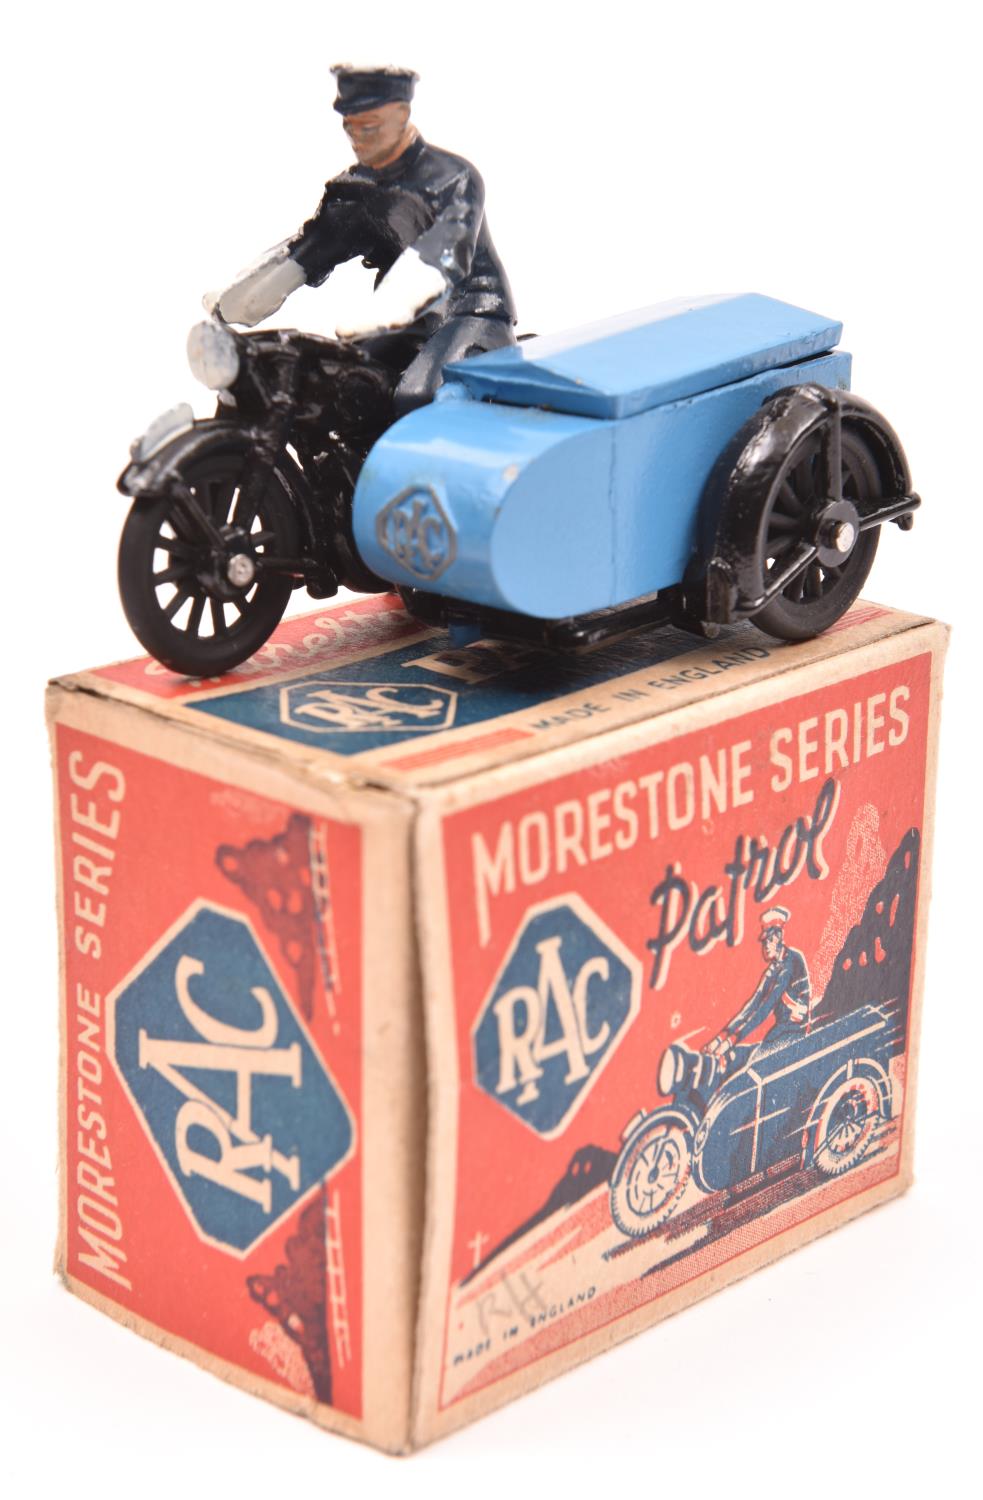 Morestone Series RAC Scout Patrol. In black and mid blue livery, with opening box sidecar,